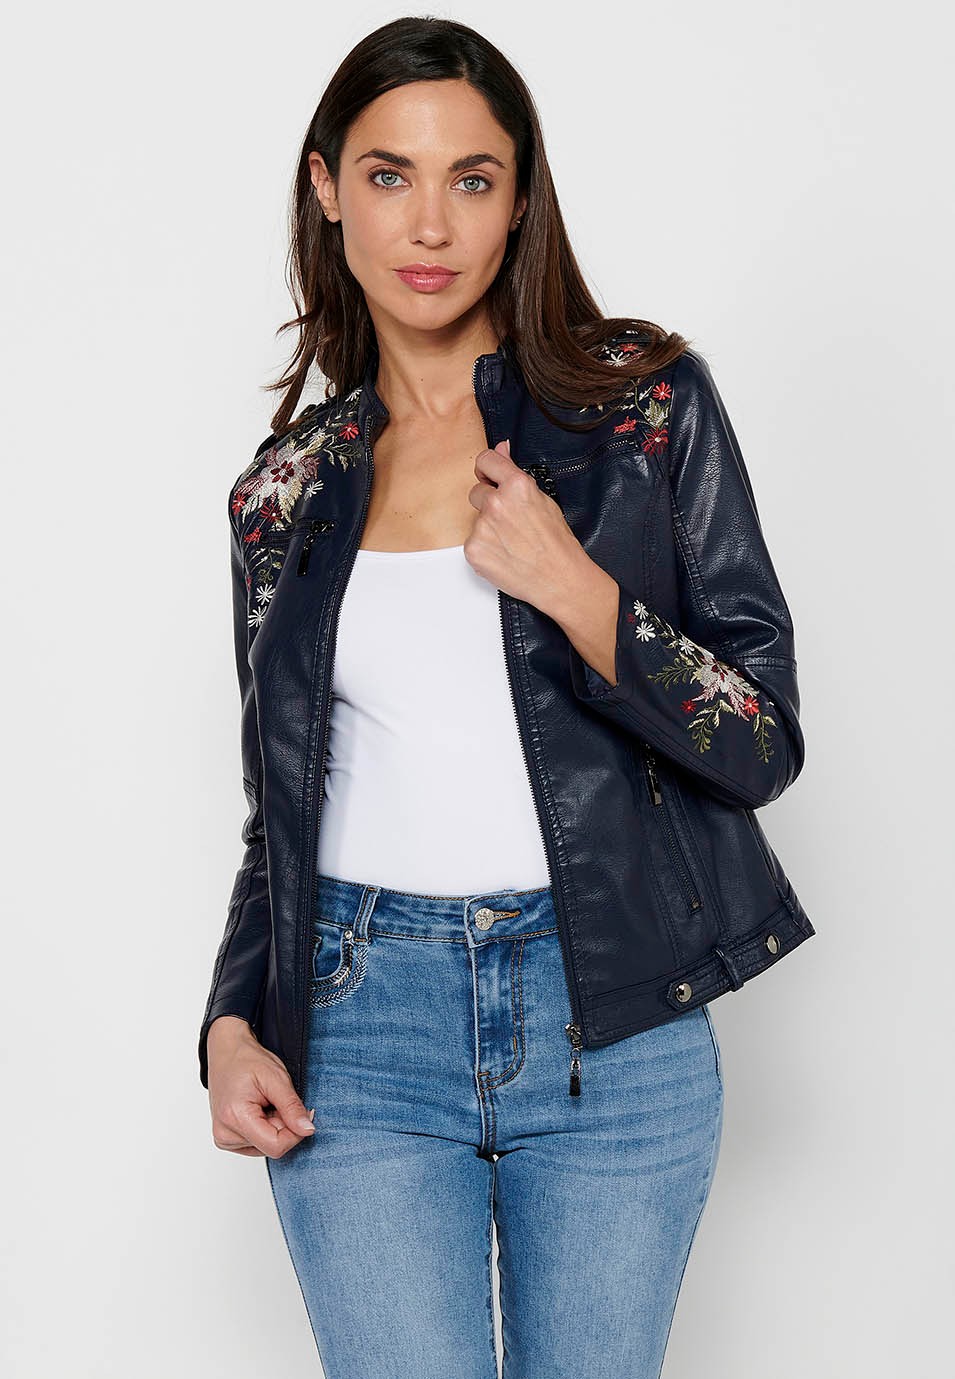 Leather-effect jacket with front zipper closure with floral embroidered details with round neck and front pockets in Navy for Women 8